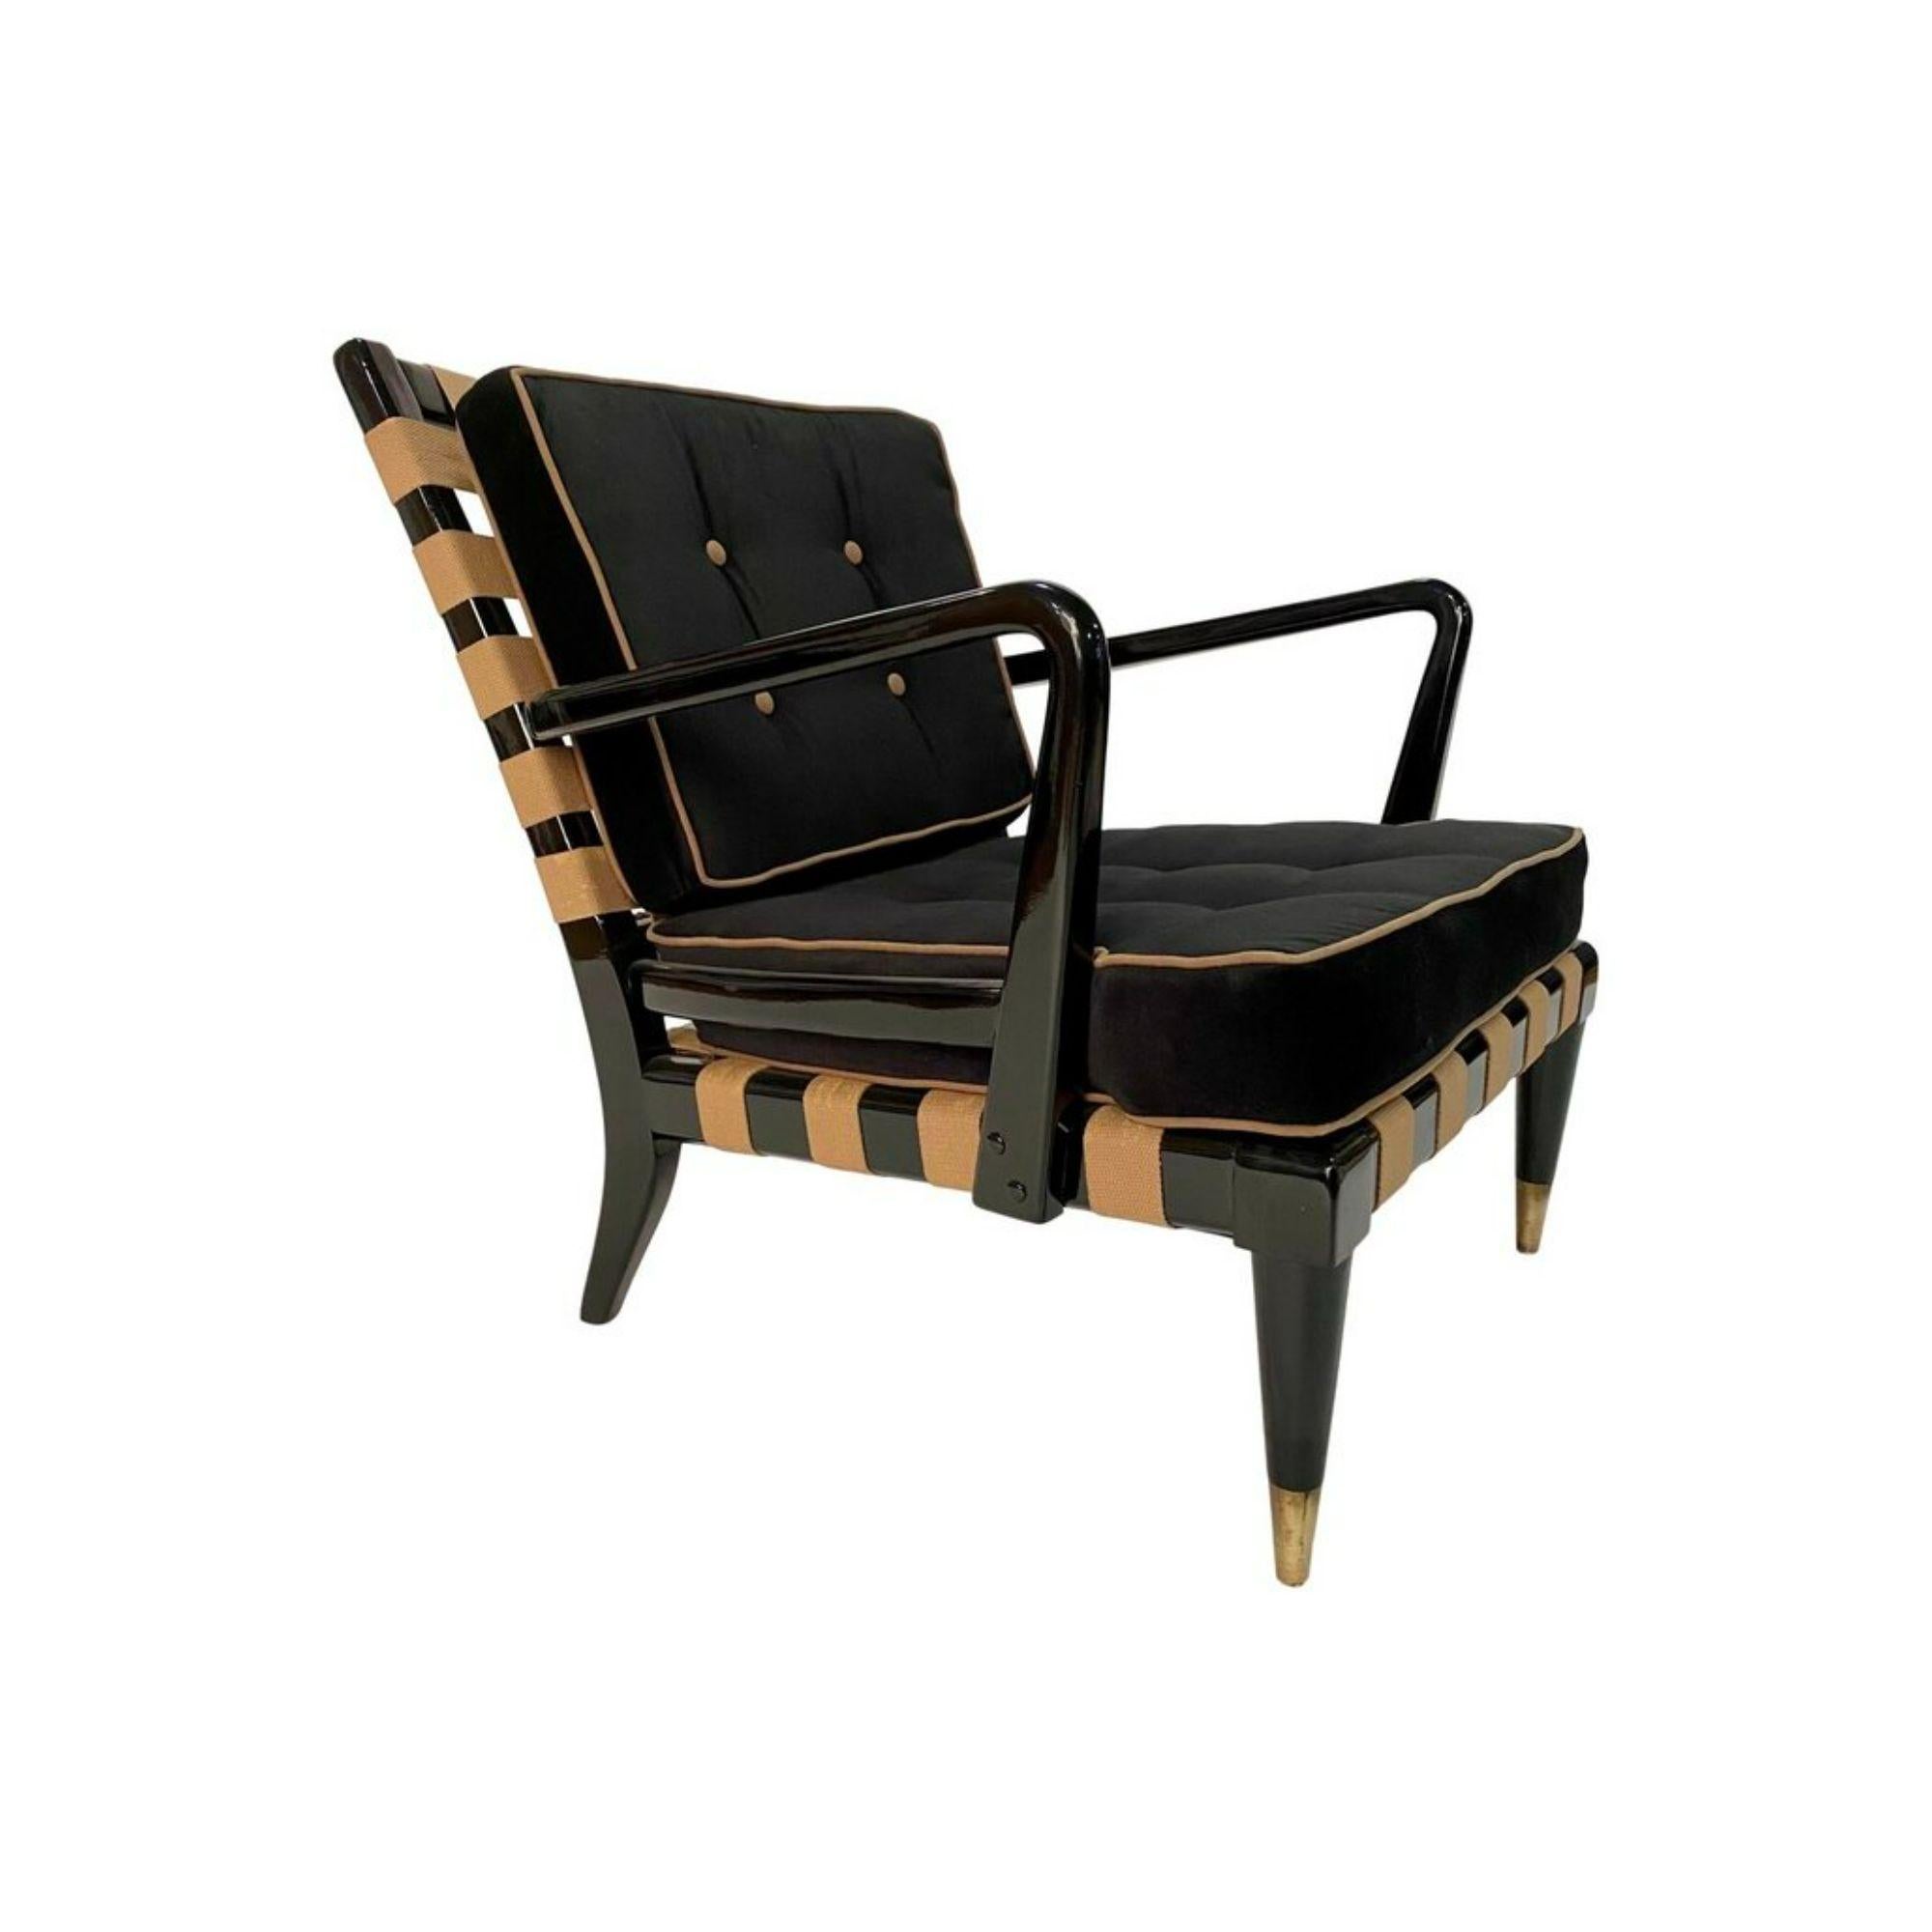 Remarkable mid-century lounge chair in the style of T.H, Robsjohn Gibbings in black lacquer sculptural wood frame with criss cross straps, bronze nail heads in the back, newly upholstered removable cushions with contrast welt and tufting and brass